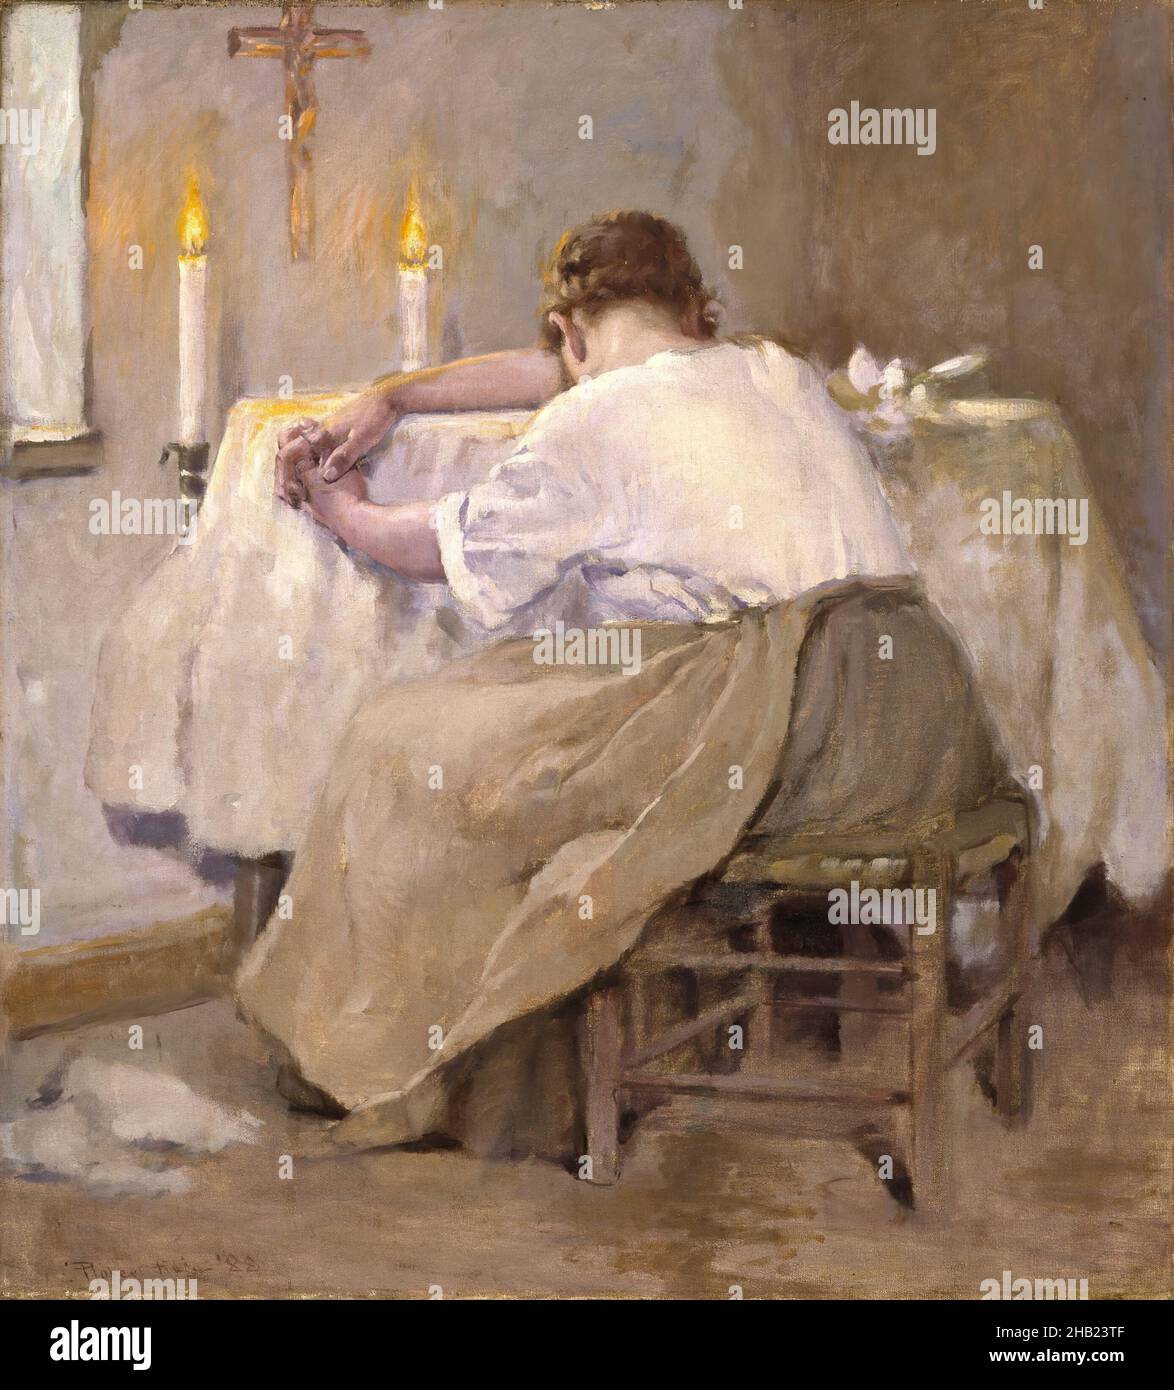 Her First Born, Robert Reid, American, 1862-1929, Oil on canvas, 1888, 37 x 33 5/8 in., 94 x 85.4 cm, 1888, American, American art, American Painting, apron, baby, candles, child, crib, cross, crucifix, crying, death, female, figure, infant, interior, mother, mourning, oil on canvas, oil painting, painting, Reid, sadness, seated, stool, tan, tired, victorian, white, woman Stock Photo